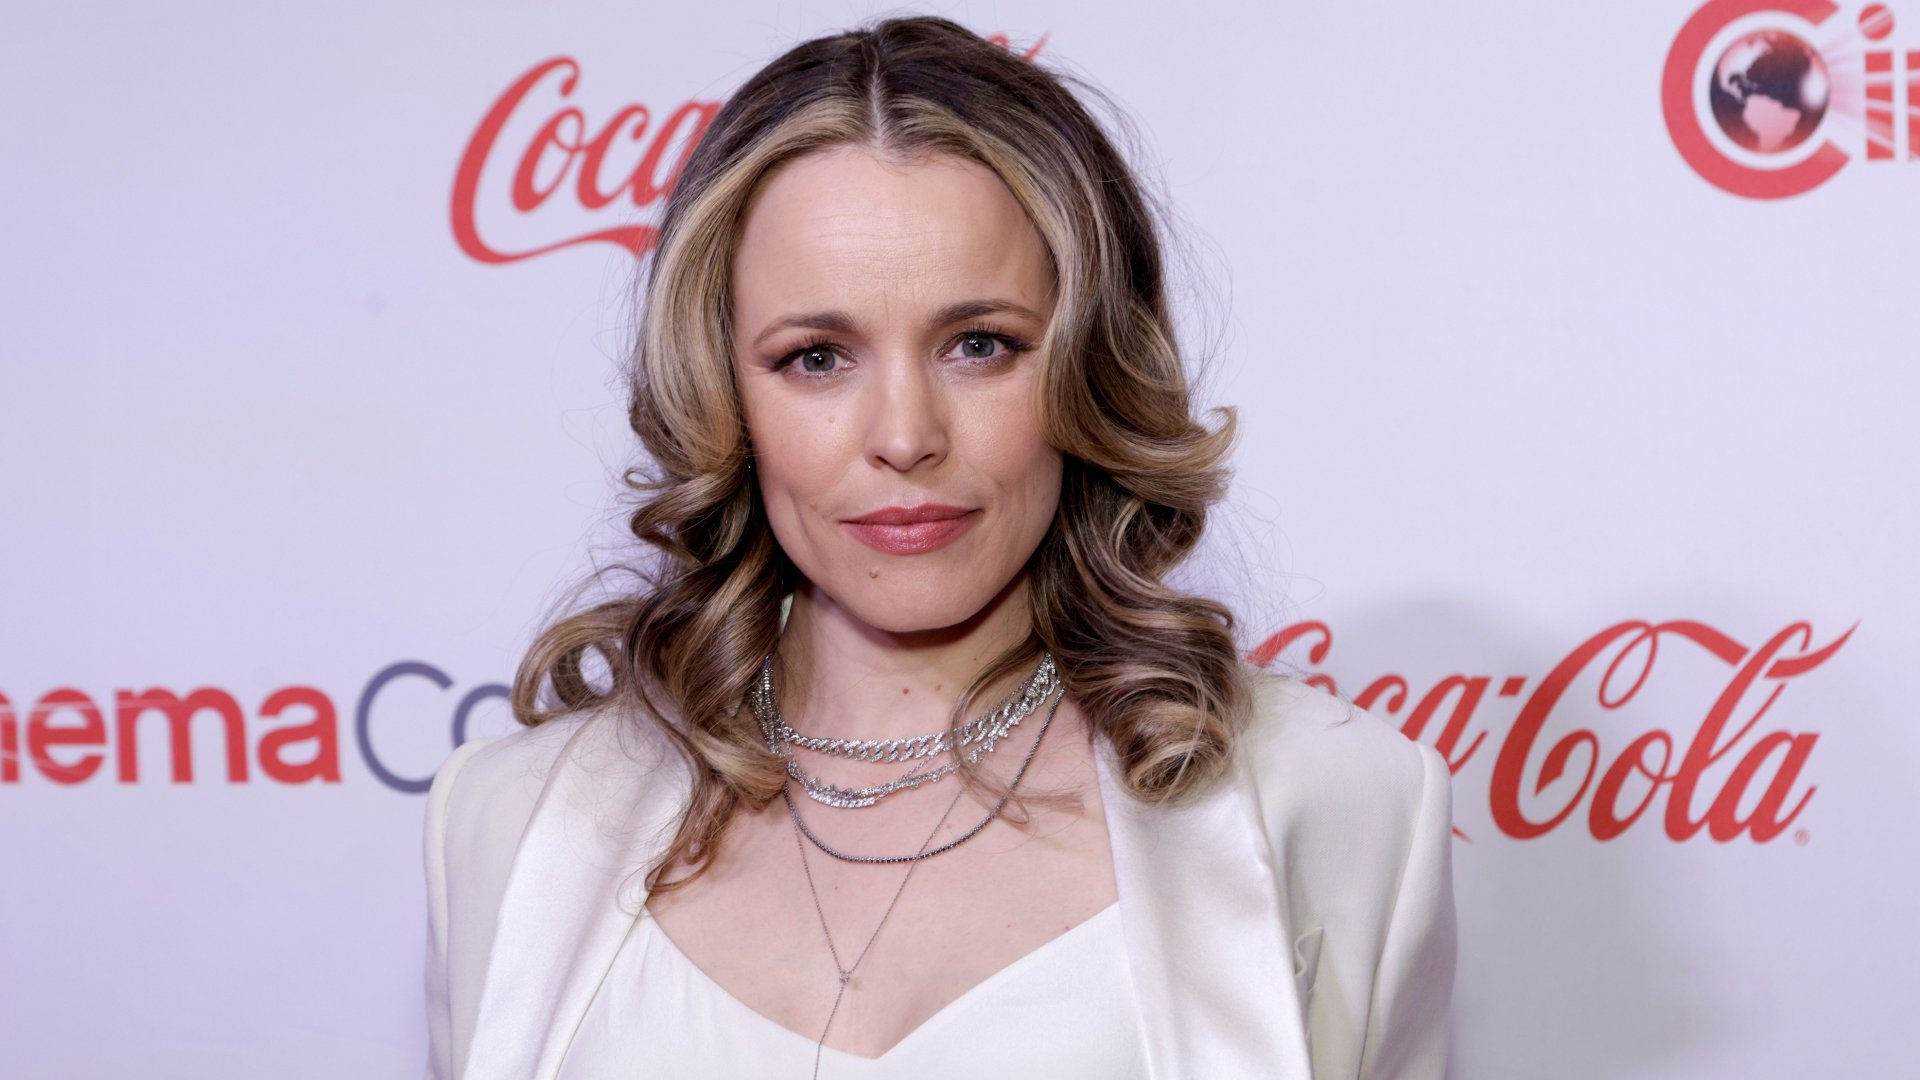 Rachel McAdams Showed Off Armpit Hair in a New Photo Shoot, And People Are Obsessed